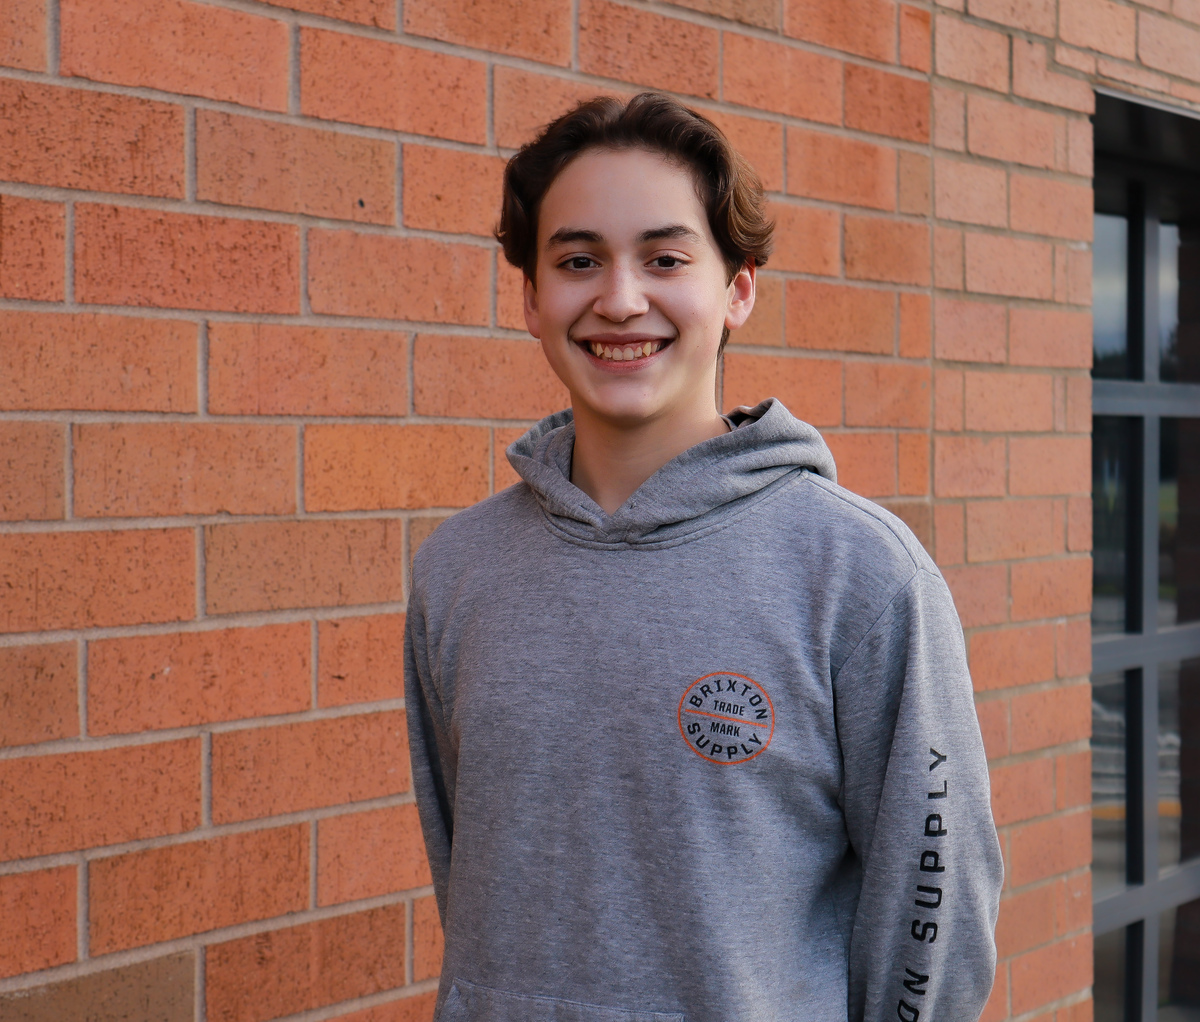 Freshman Trent Earls enjoys discovering new music, especially rap and pop artists and songs.